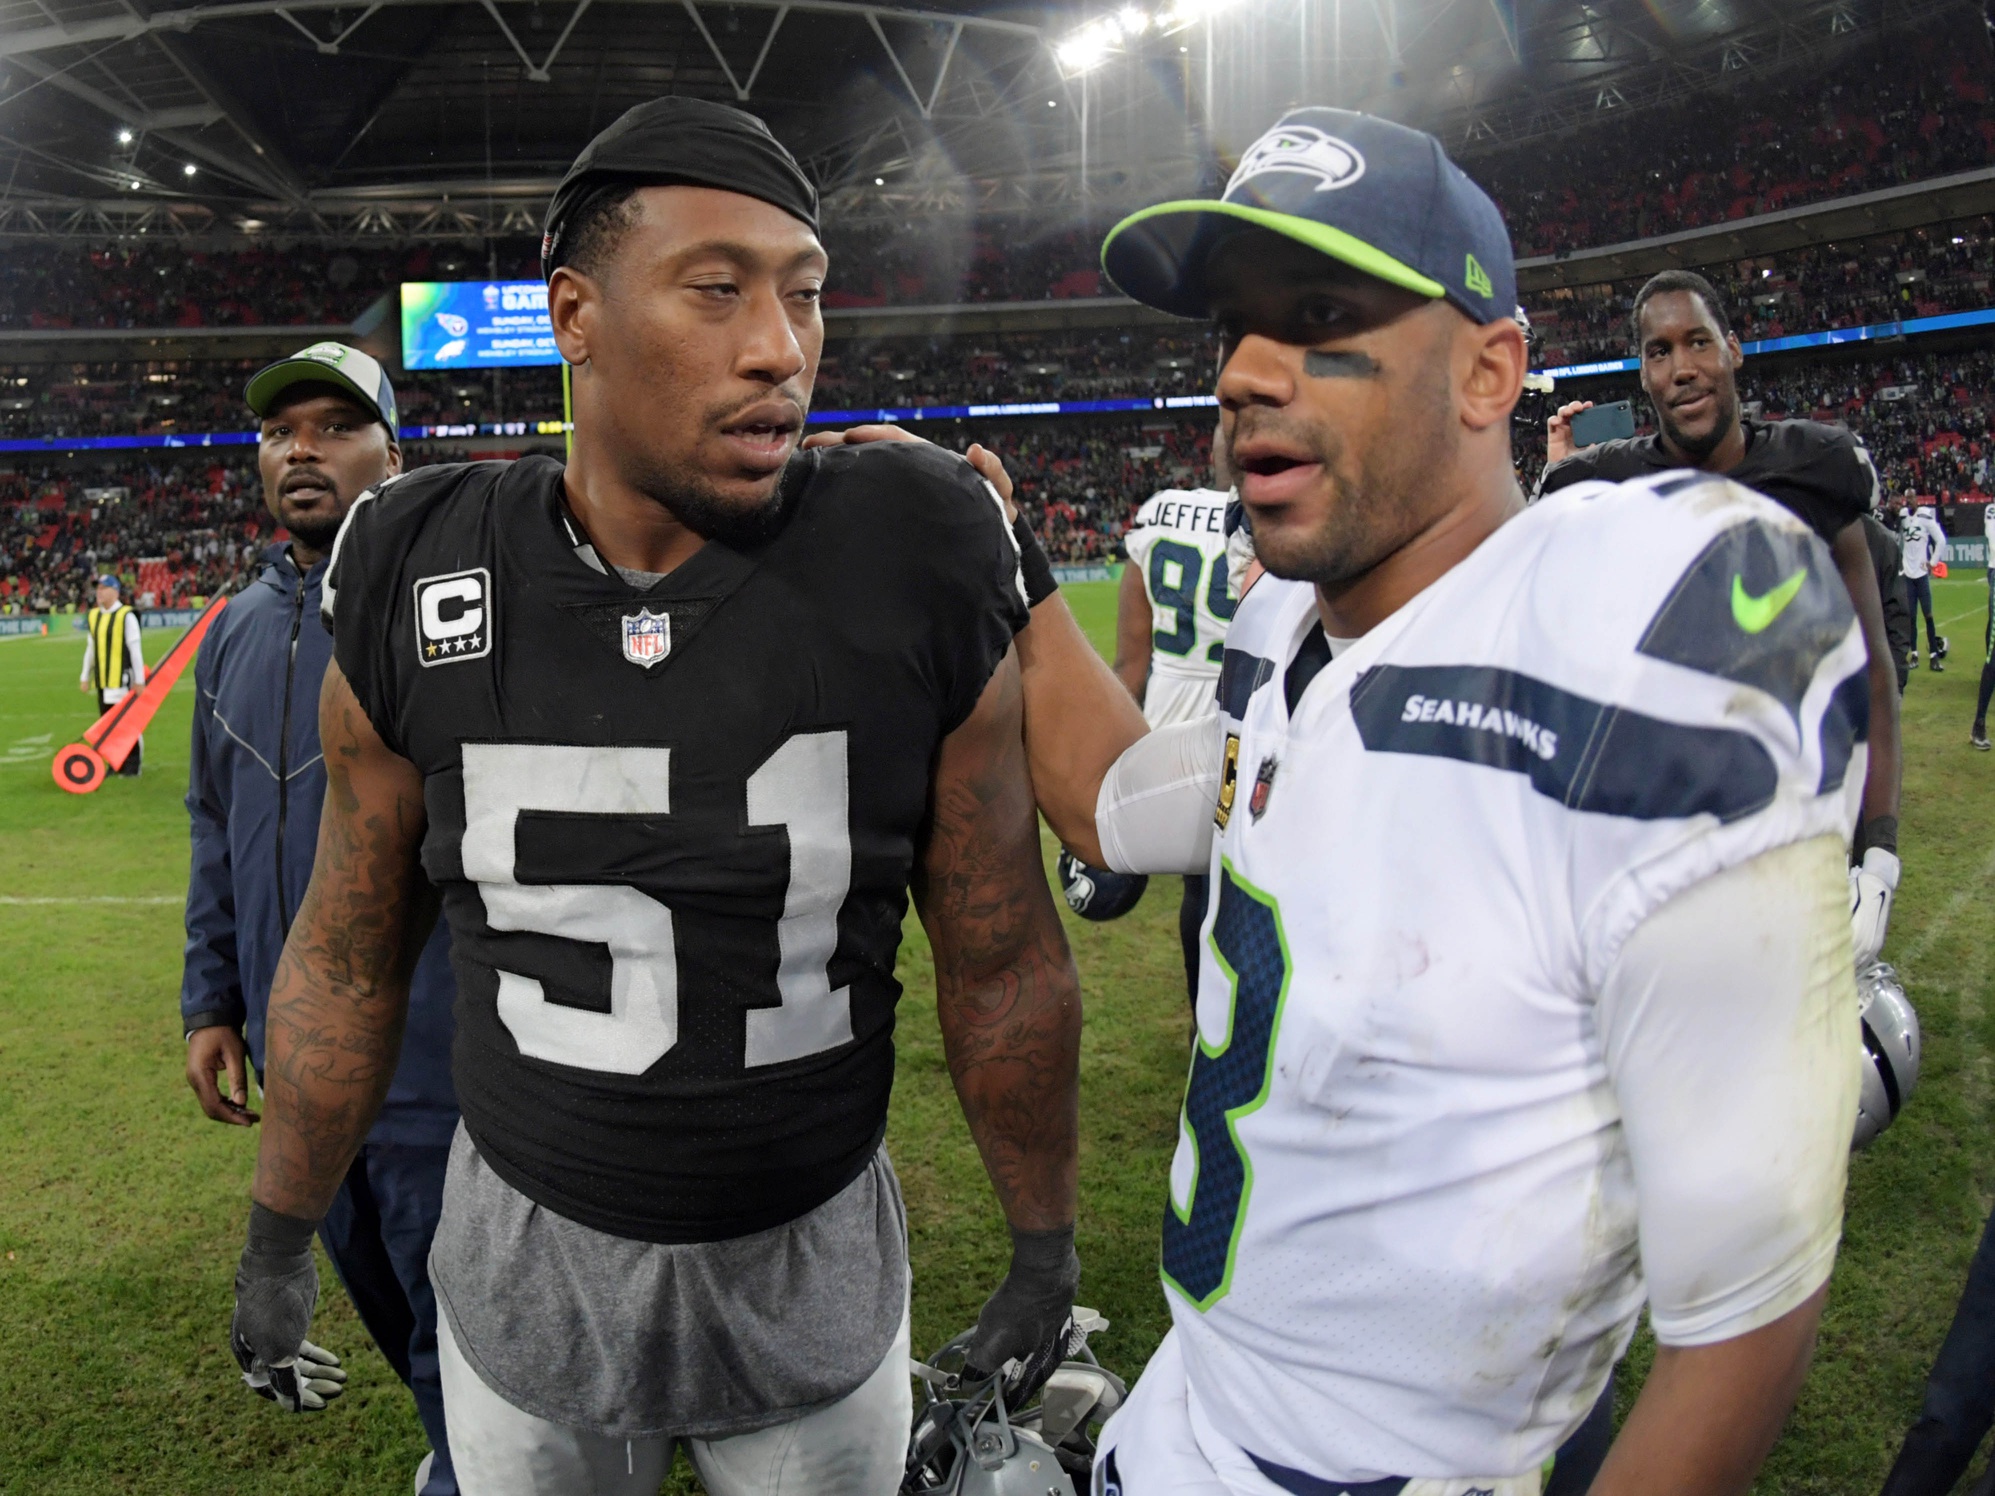 Bruce Irvin raises eyebrows with 